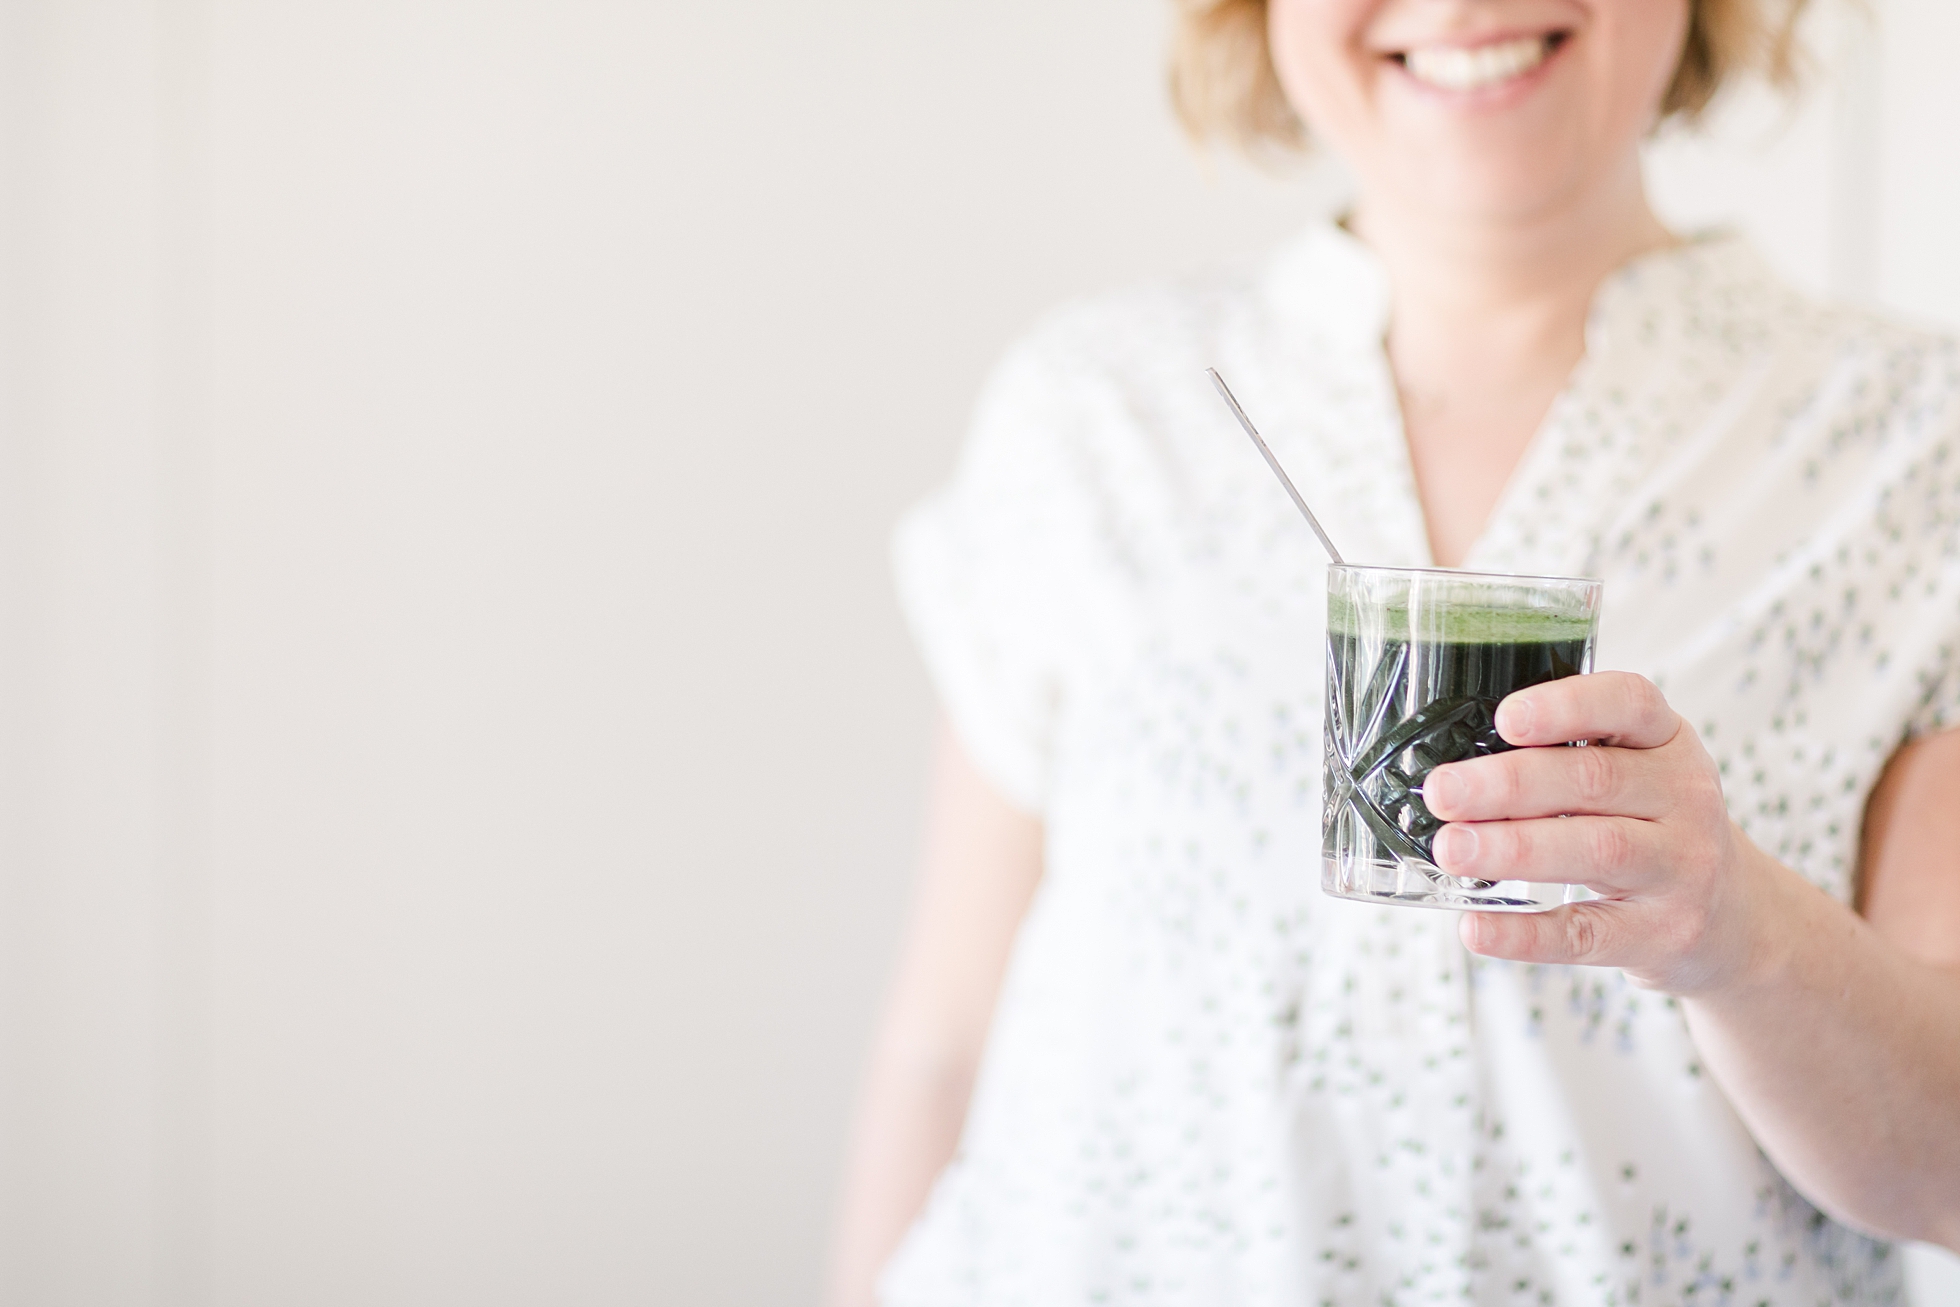 A smiling woman holding a green drink